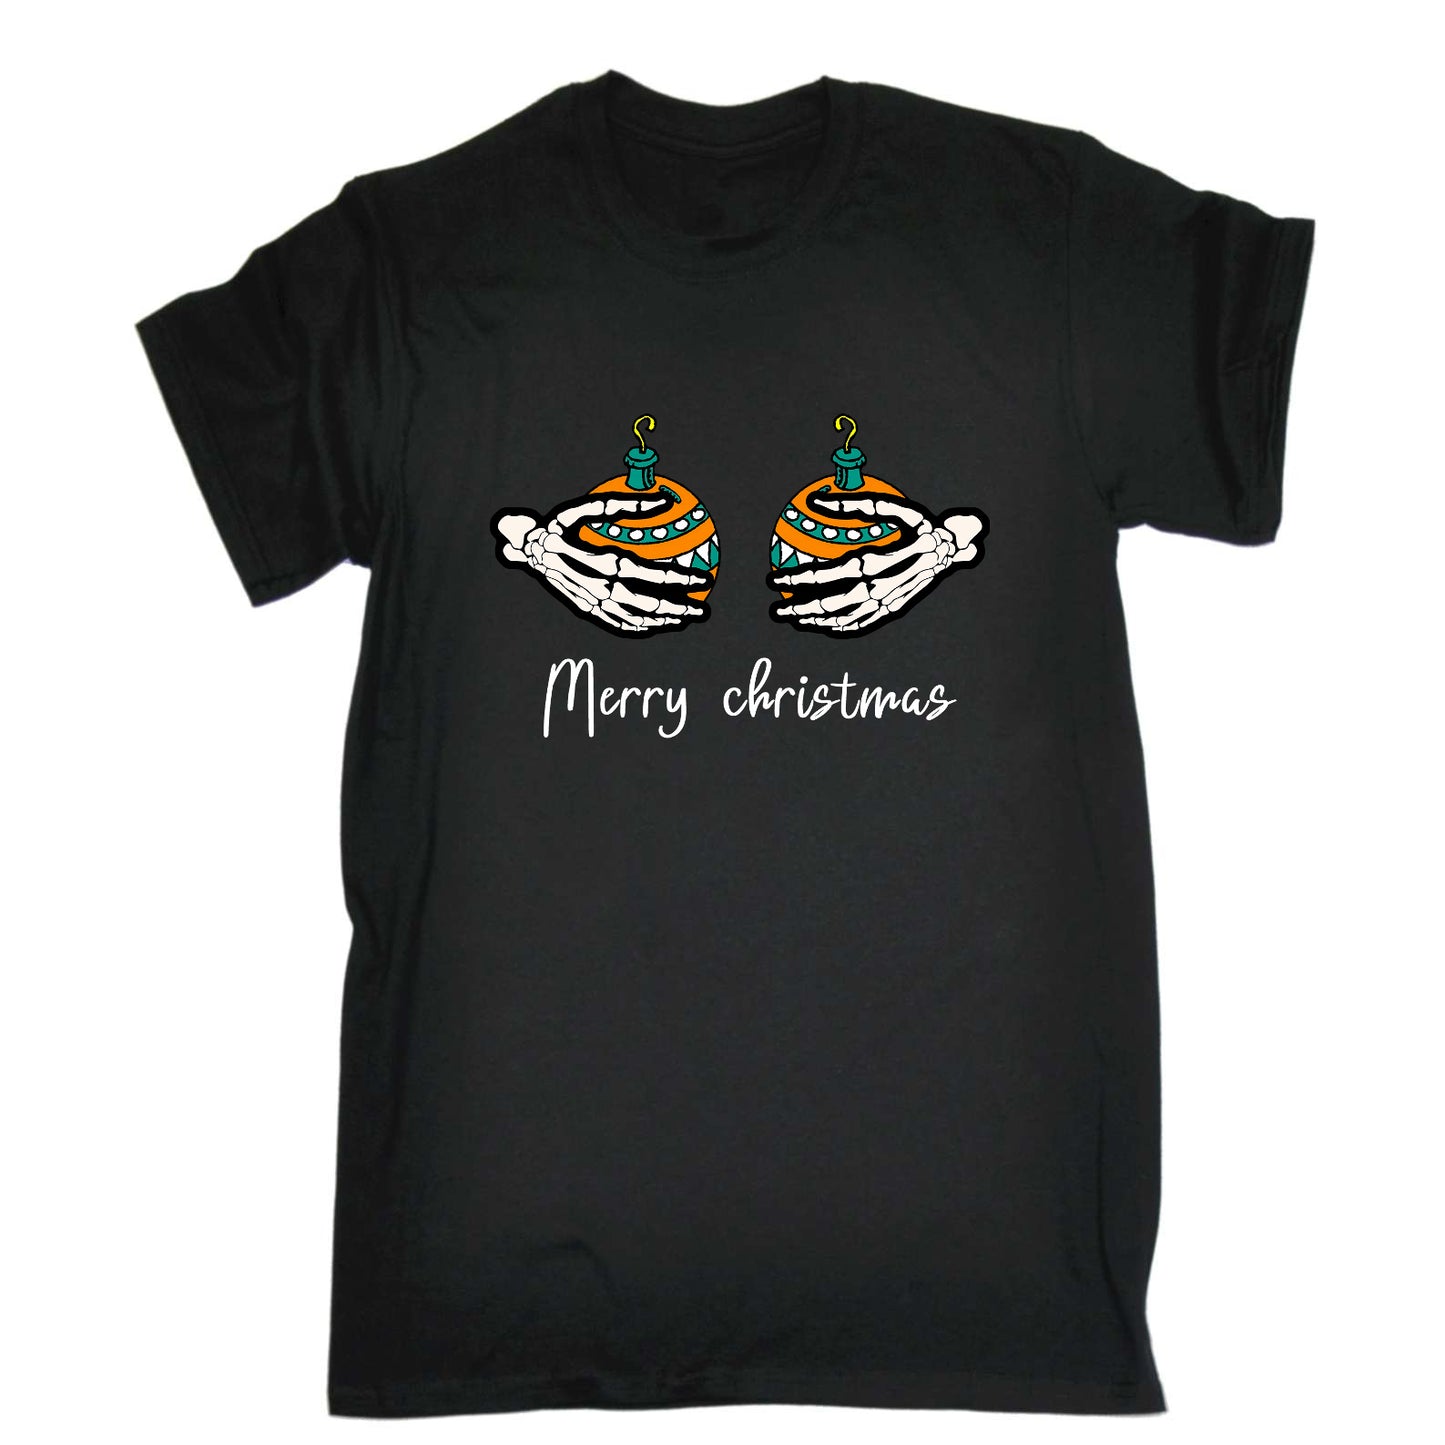 Merry Christmas Baubles Skeleton Hands - Mens Funny T-Shirt Tshirts